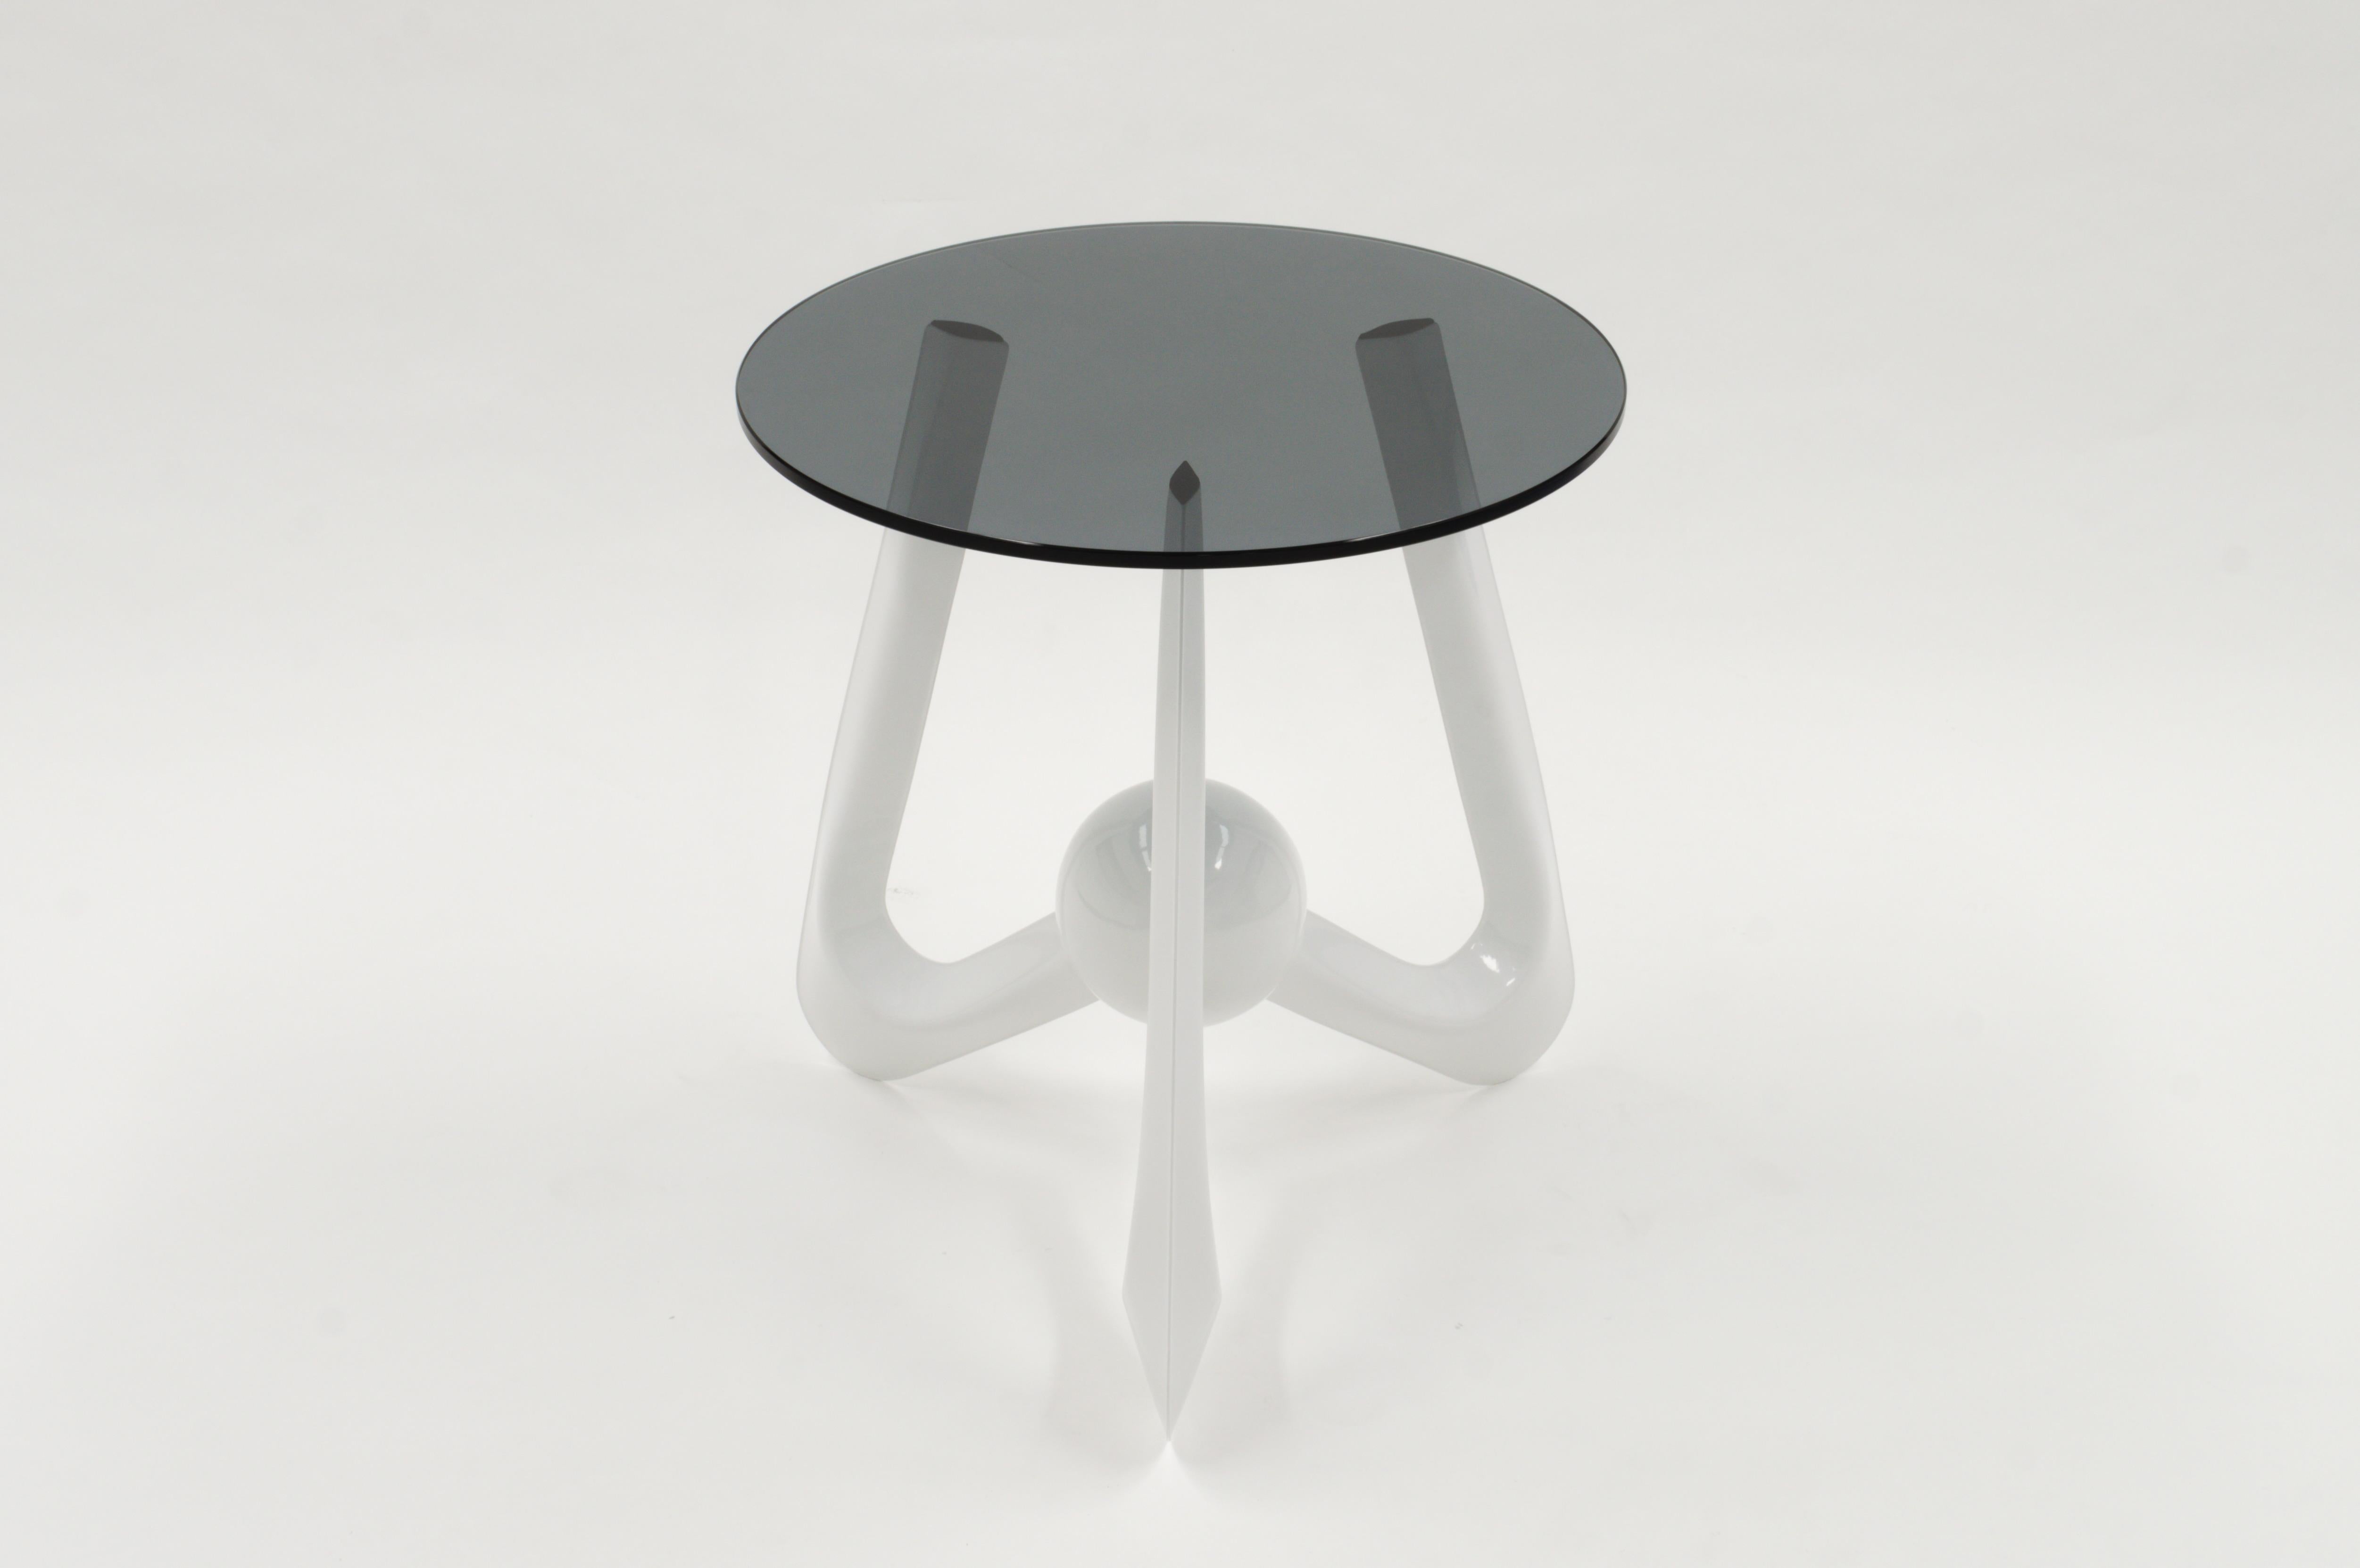 Futuristic tripod table featuring inflated steel legs, formed by precise injection of compressed air. ​Inflating metal creates complex three-dimensional forms that are extremely strong for their weight, even when the metal before inflation is only